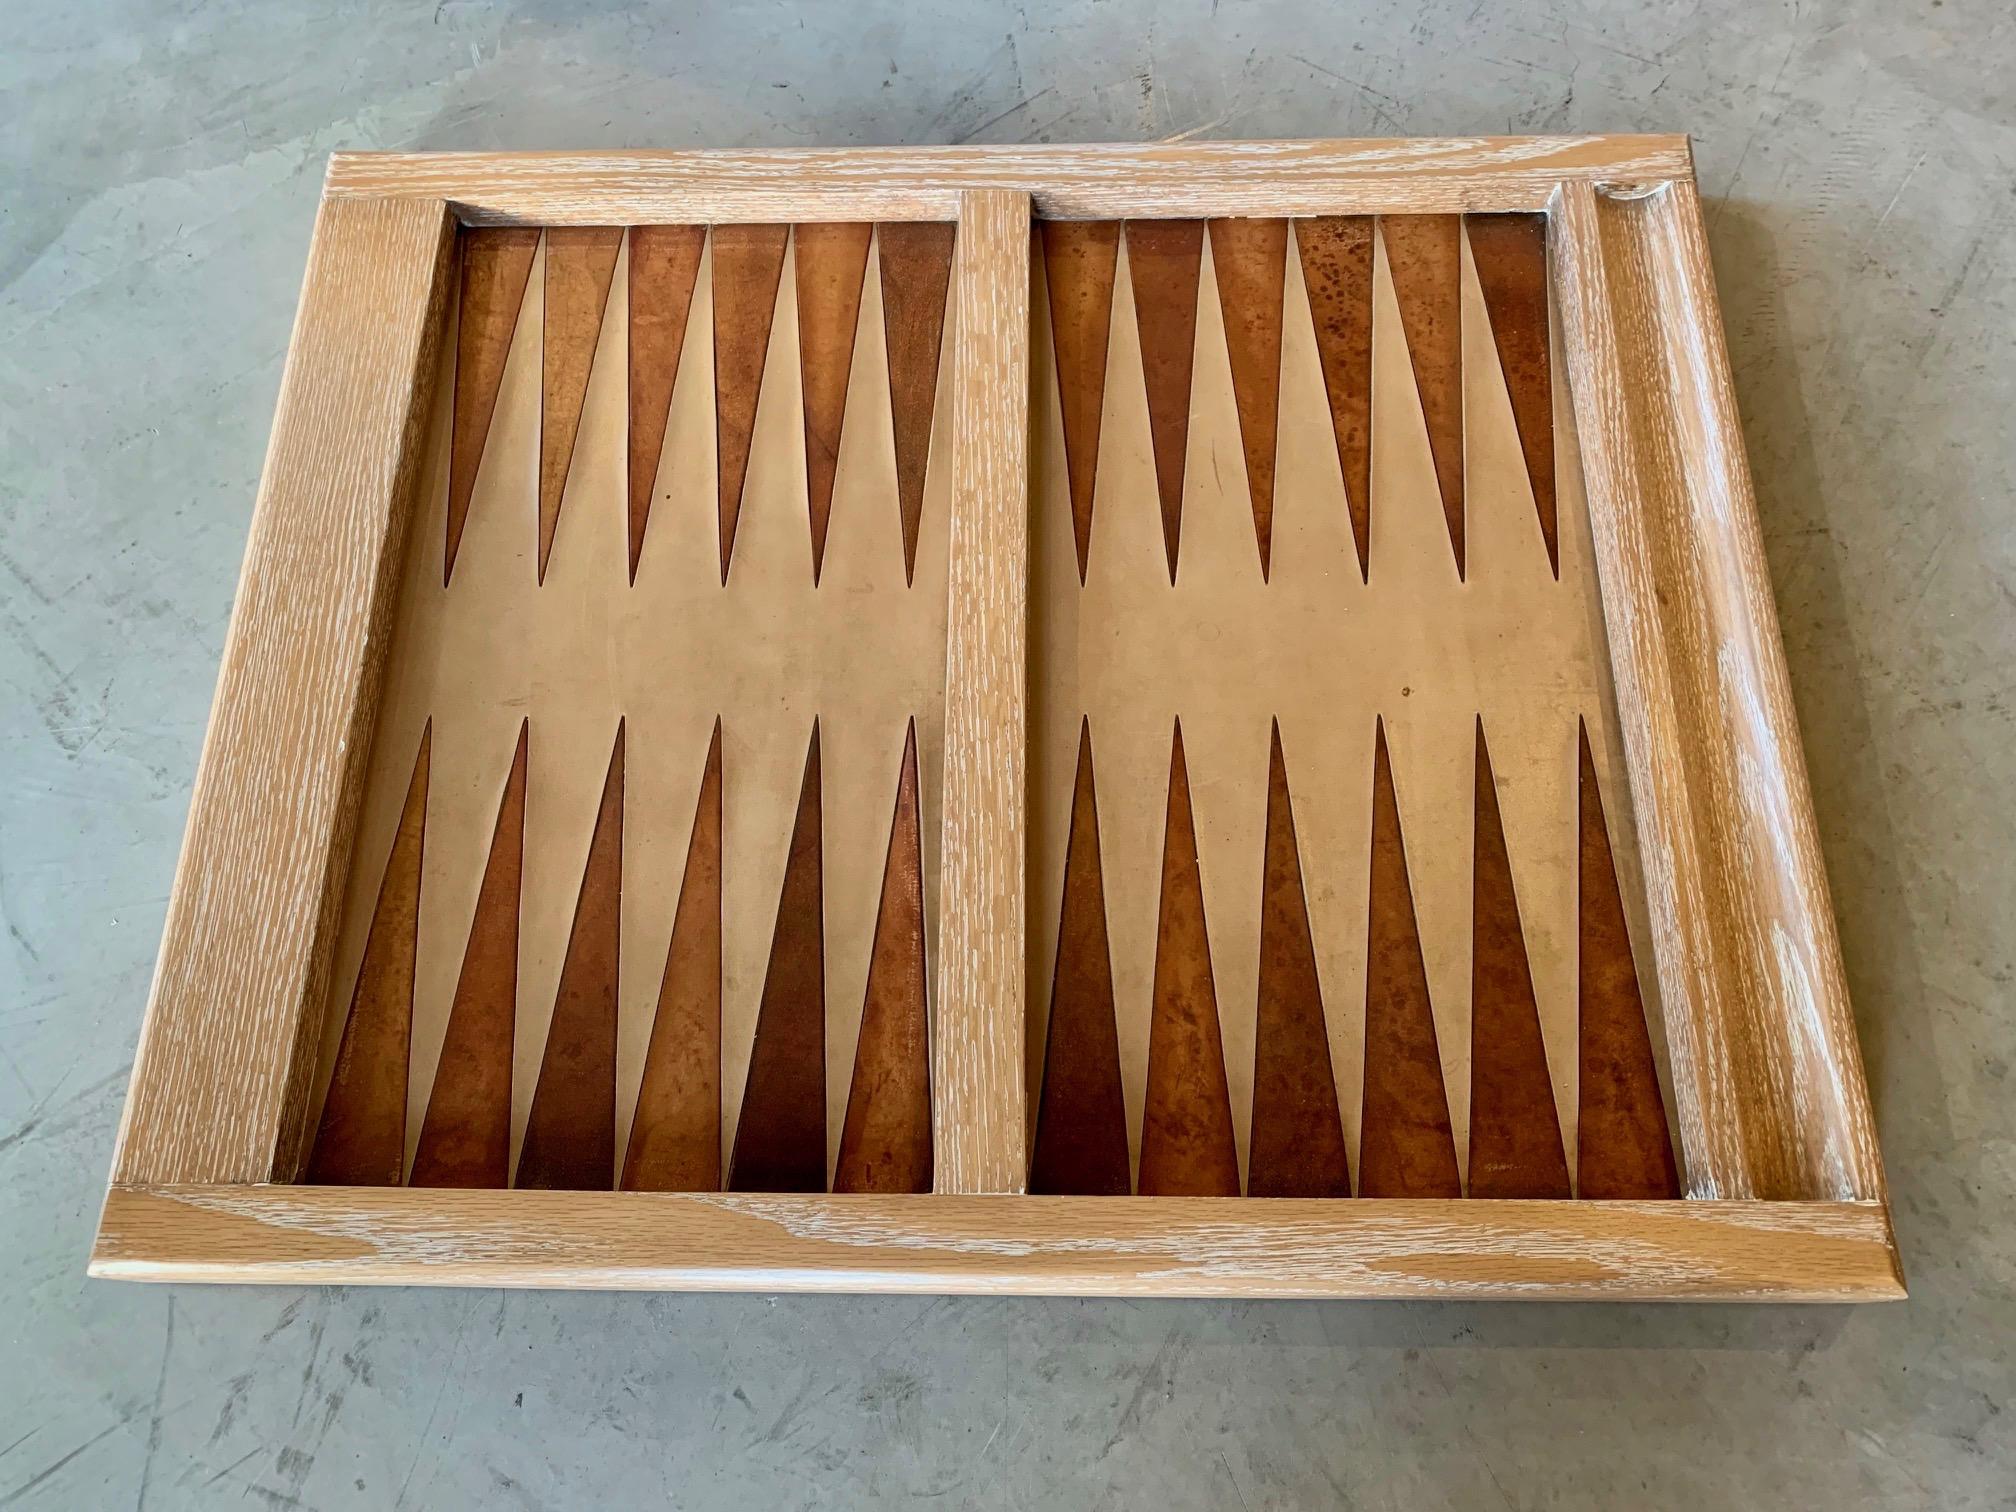 Stunning vintage backgammon board refinished in cerused oak. Game play area is made up of tan leather, with saddle leather triangles. Excellent vintage condition. Very substantial and heavy board.